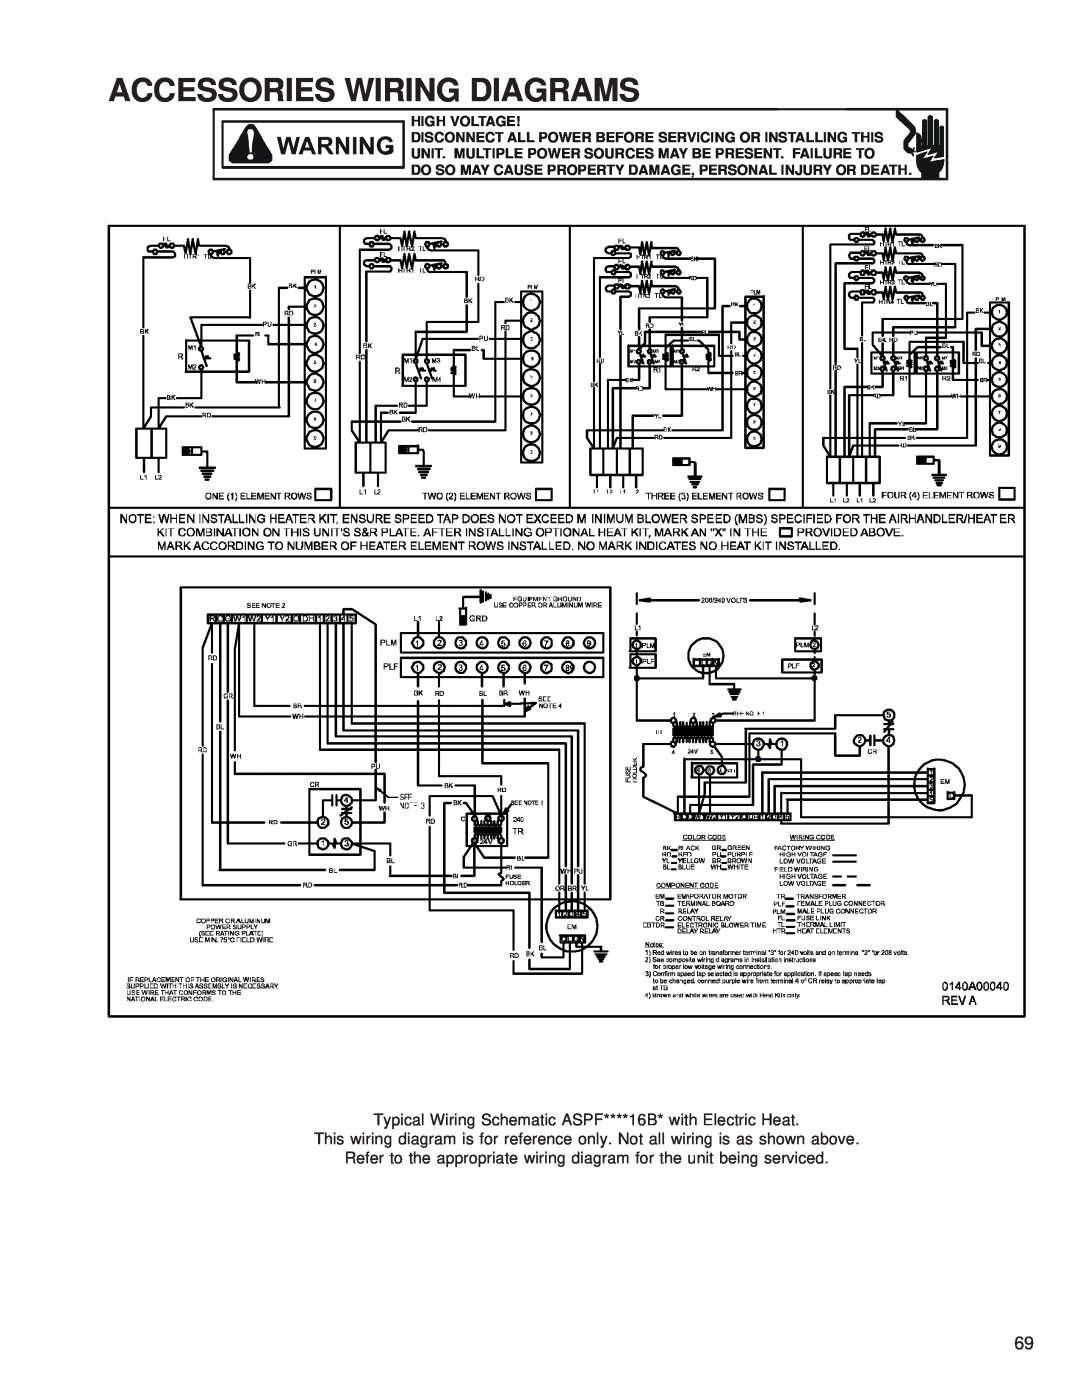 Goodman Mfg RT6100004R13 manual Accessories Wiring Diagrams, Typical Wiring Schematic ASPF****16B* with Electric Heat 